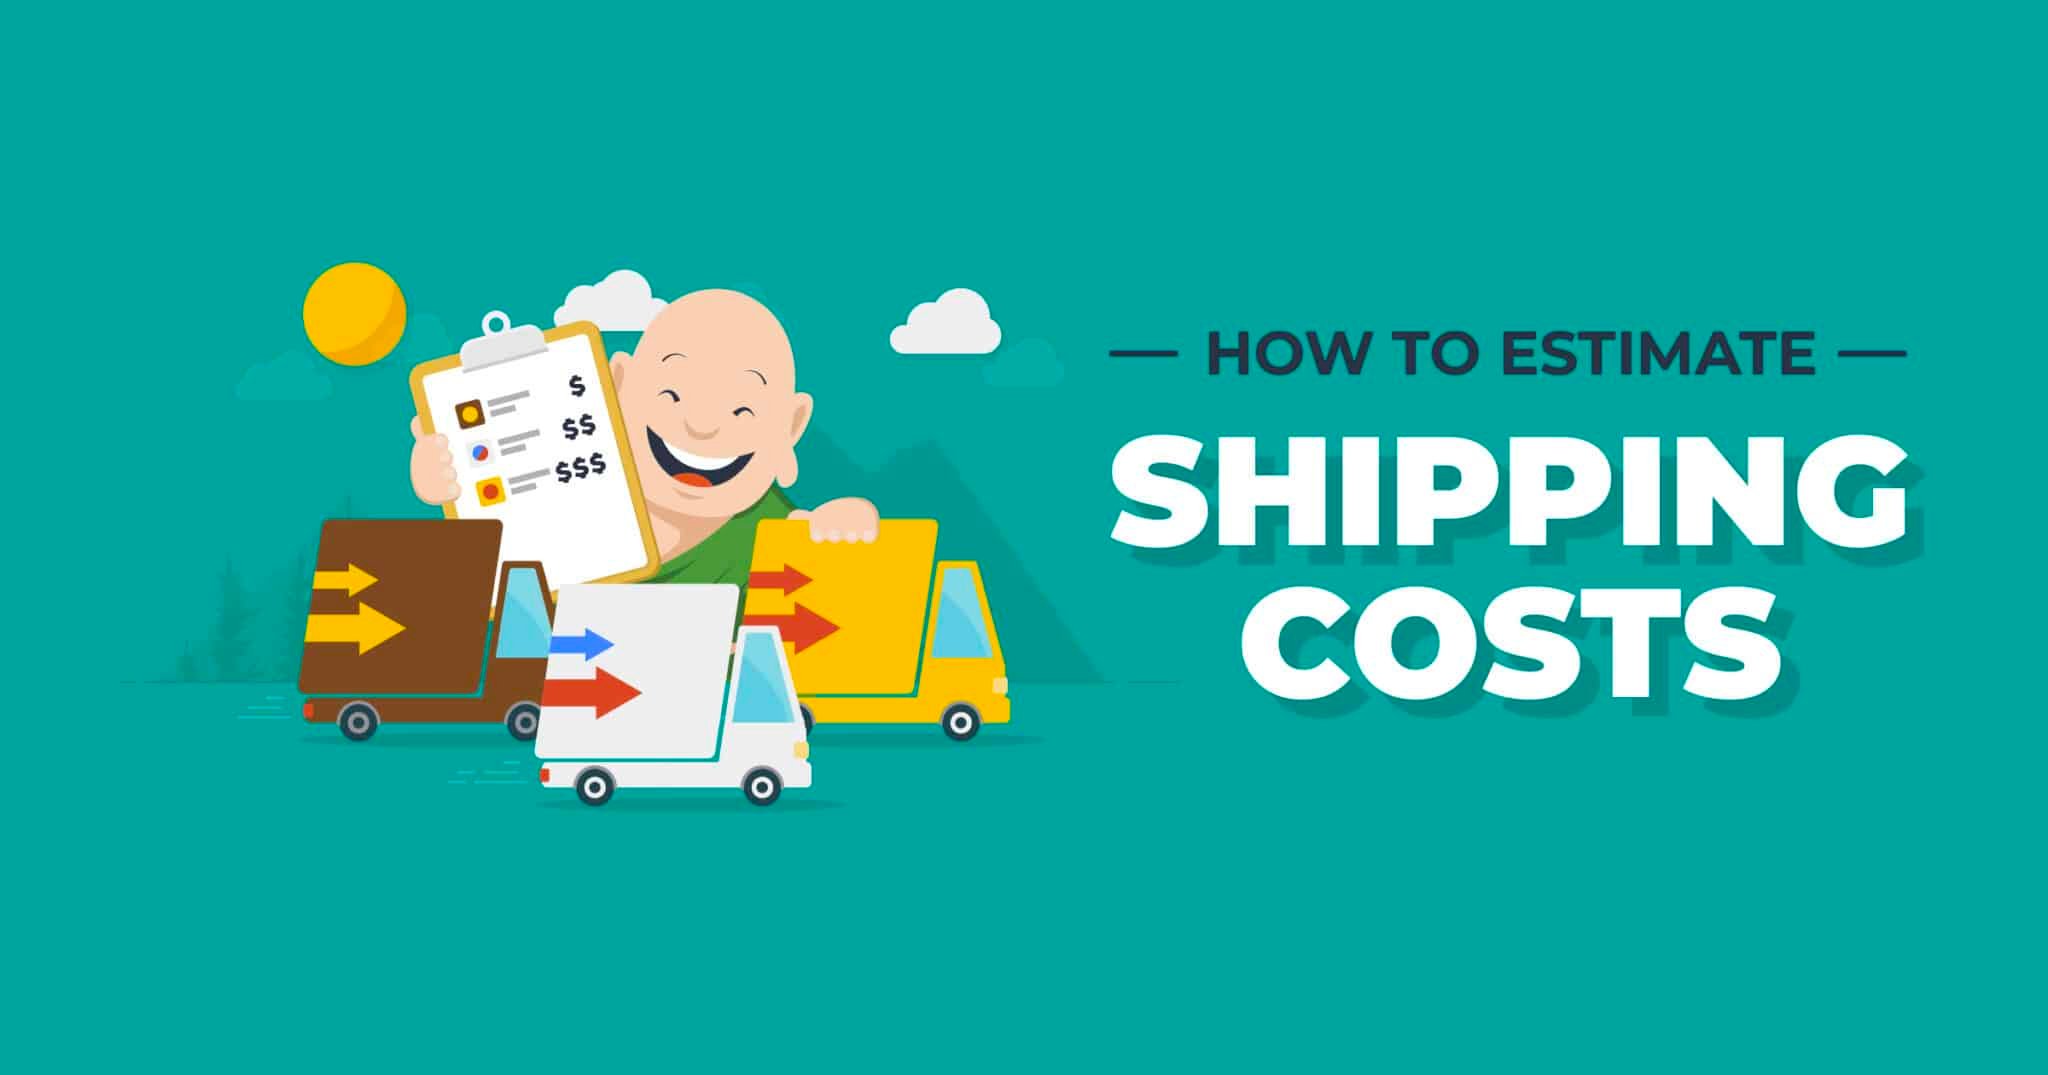 How to Estimate Shipping Costs for eCommerce Fulfillment